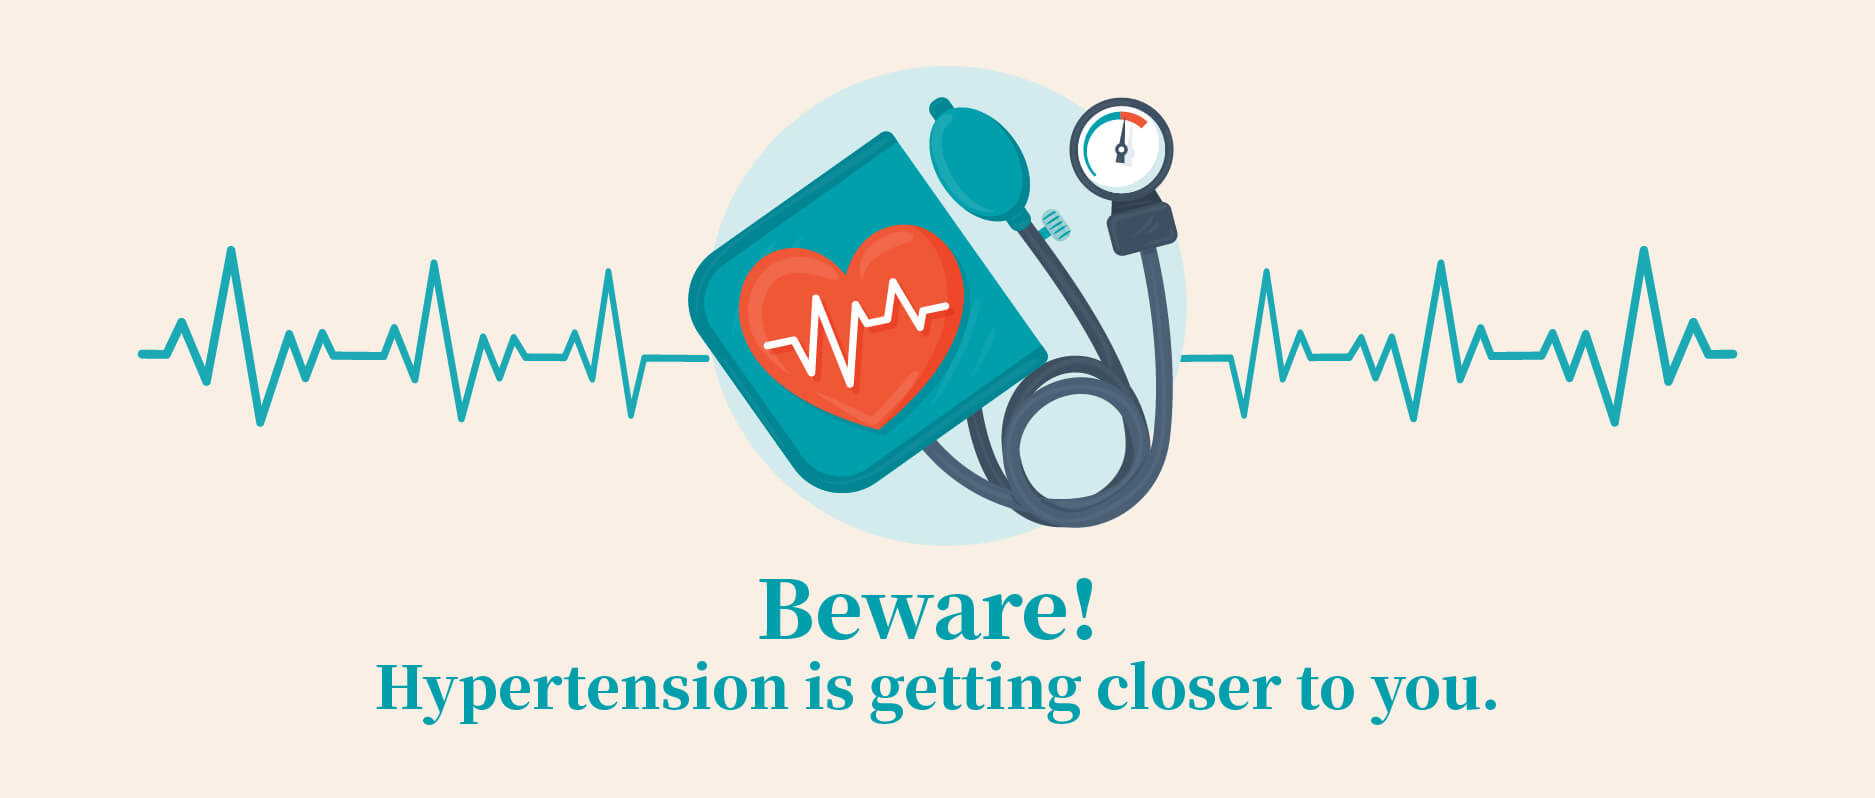 Beware! Hypertension is getting closer to you.